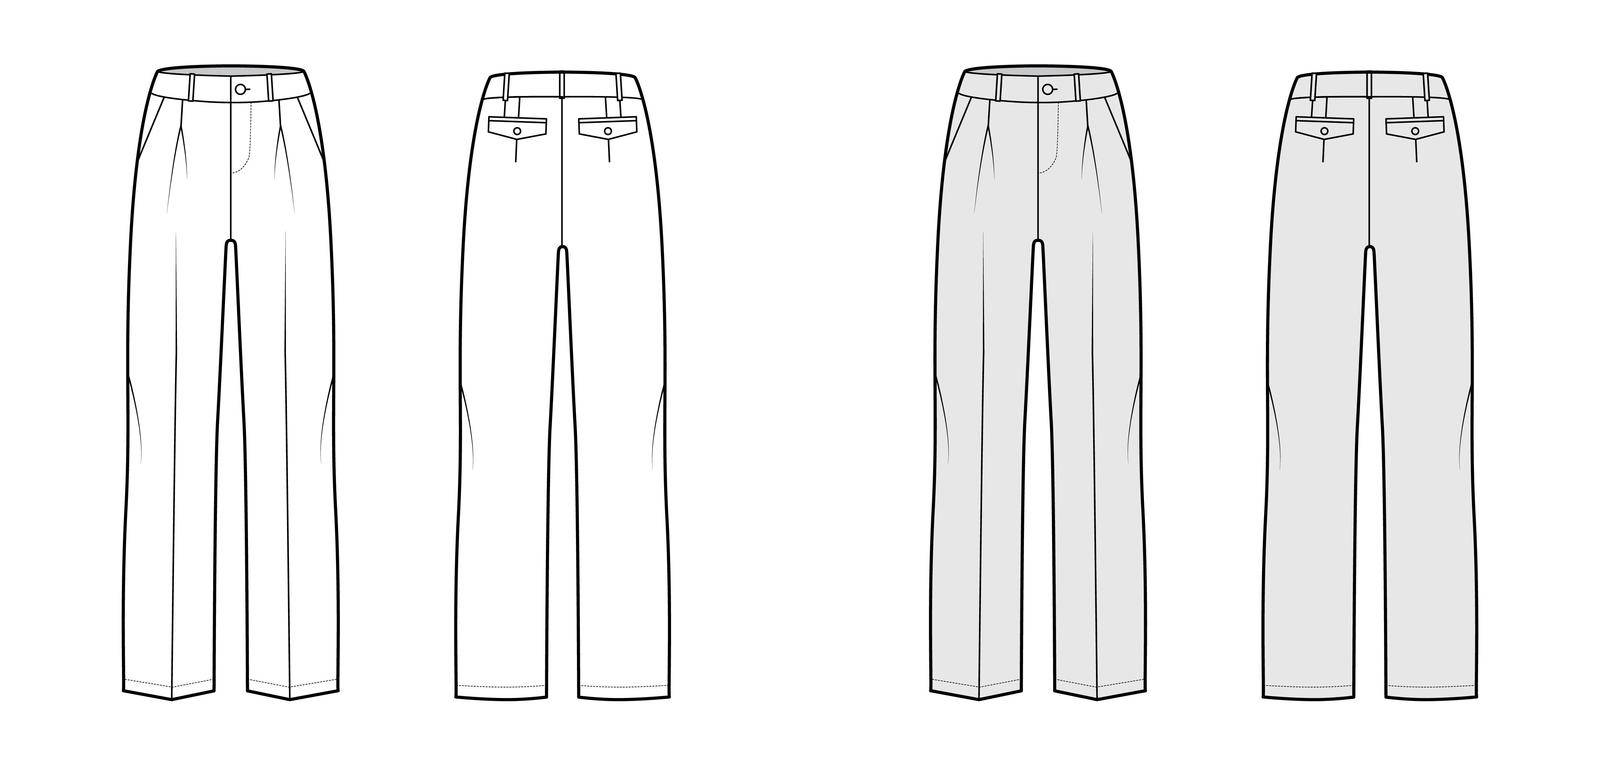 Pants tailored technical fashion illustration with low waist, rise, slant slashed flap pockets, single pleat, belt loops. Flat casual bottom trousers front, back white grey color. Women men CAD mockup